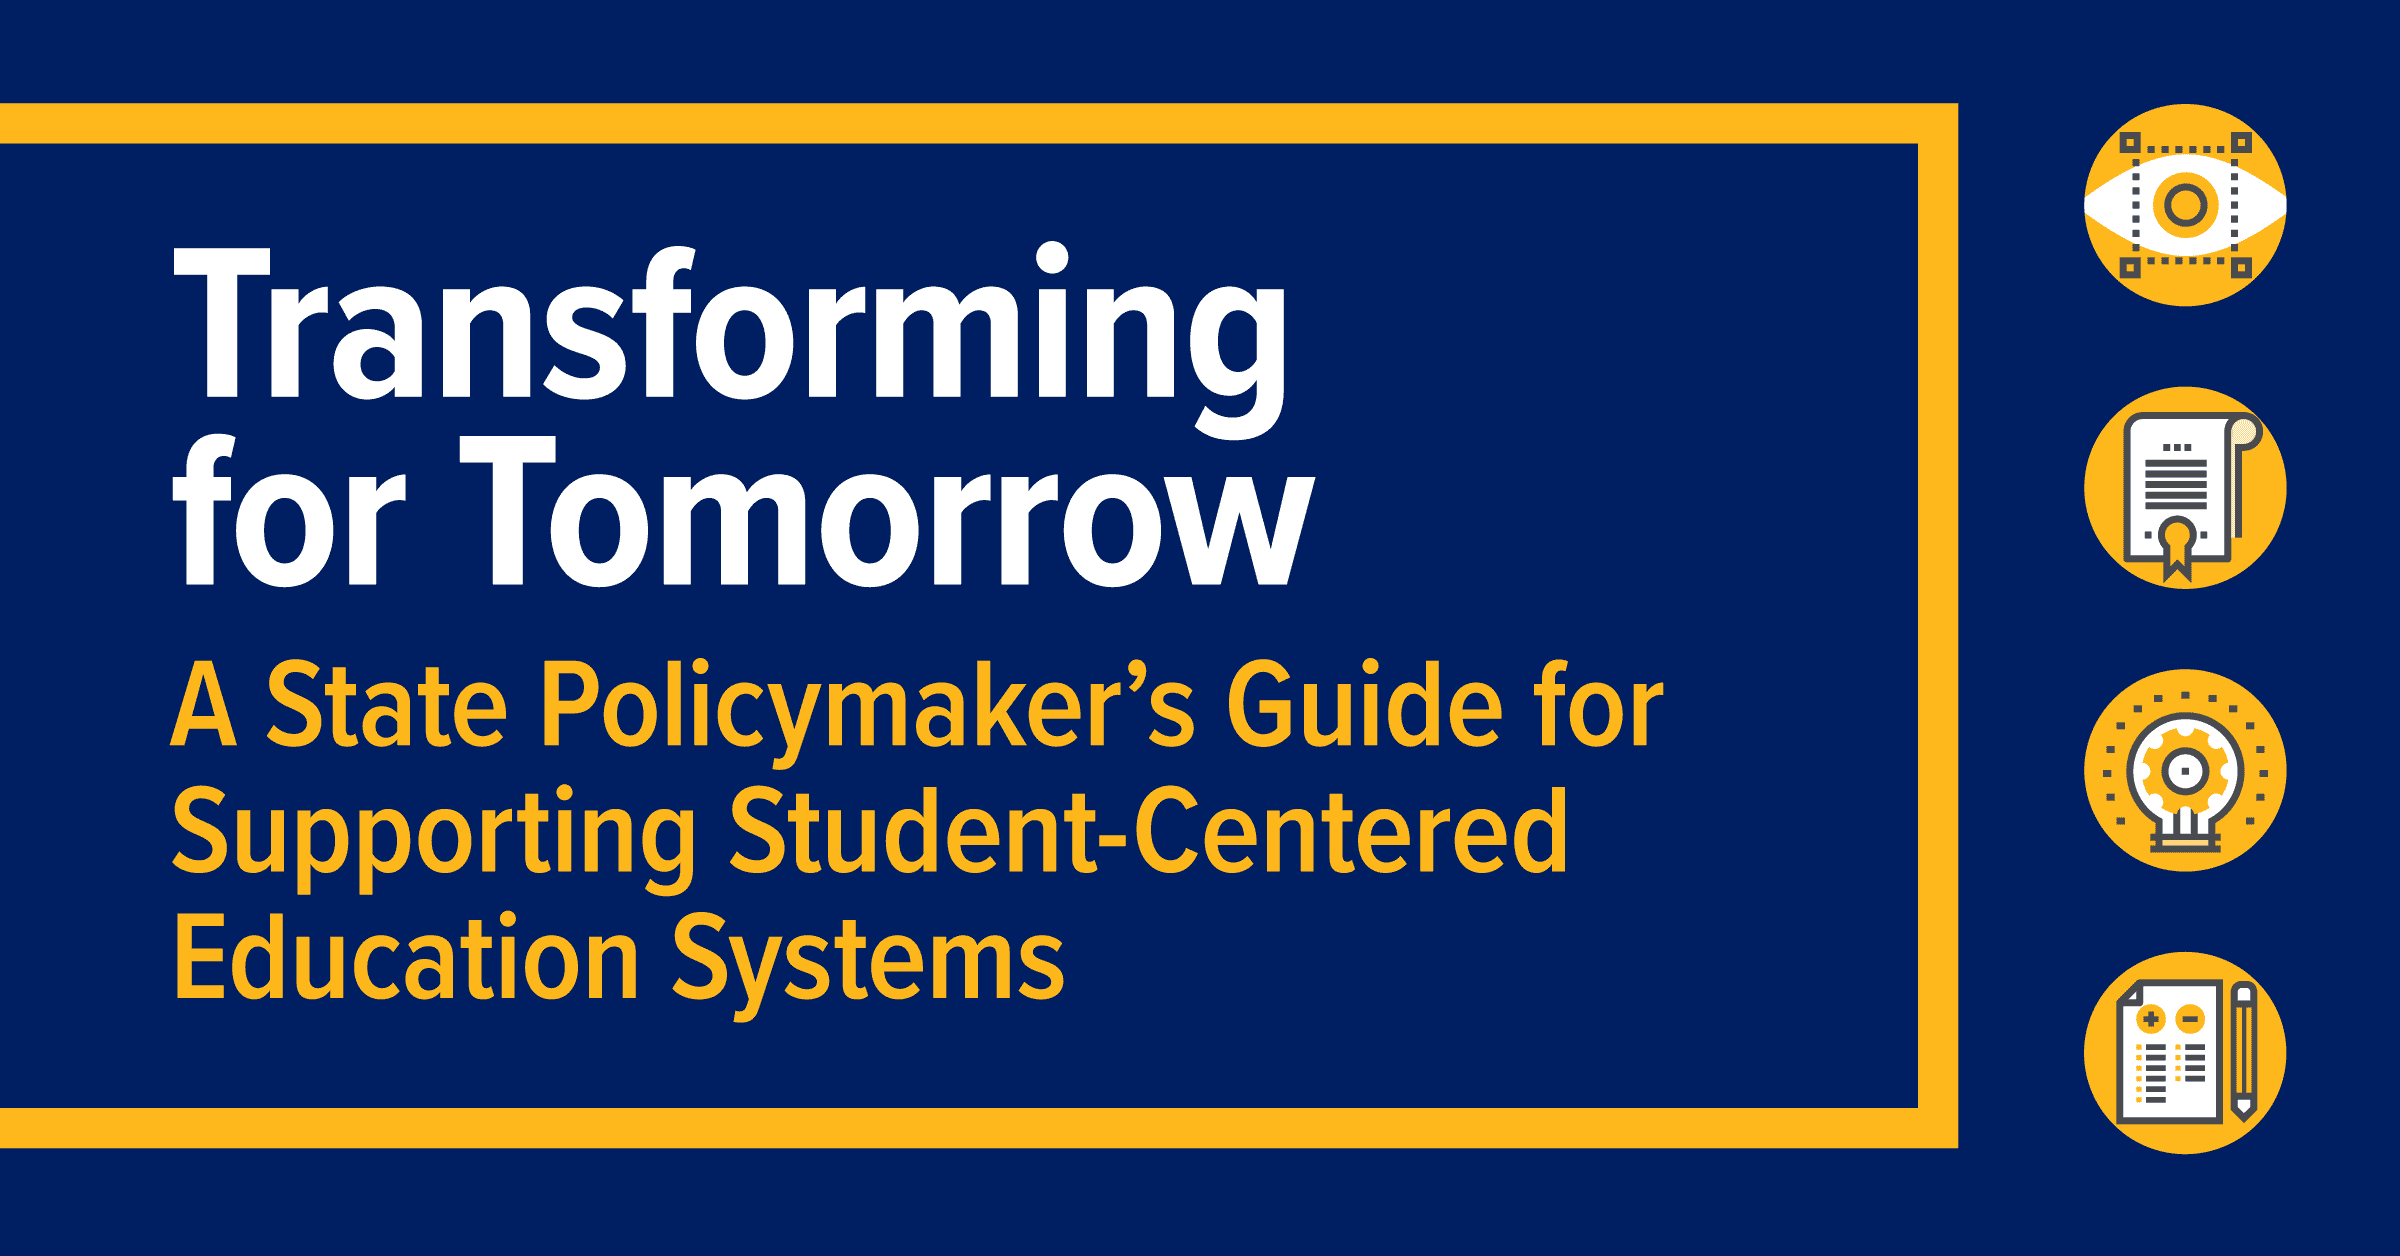 Transforming for Tomorrow: A State Policymaker's Guide for Supporting Student-Centered Education Systems